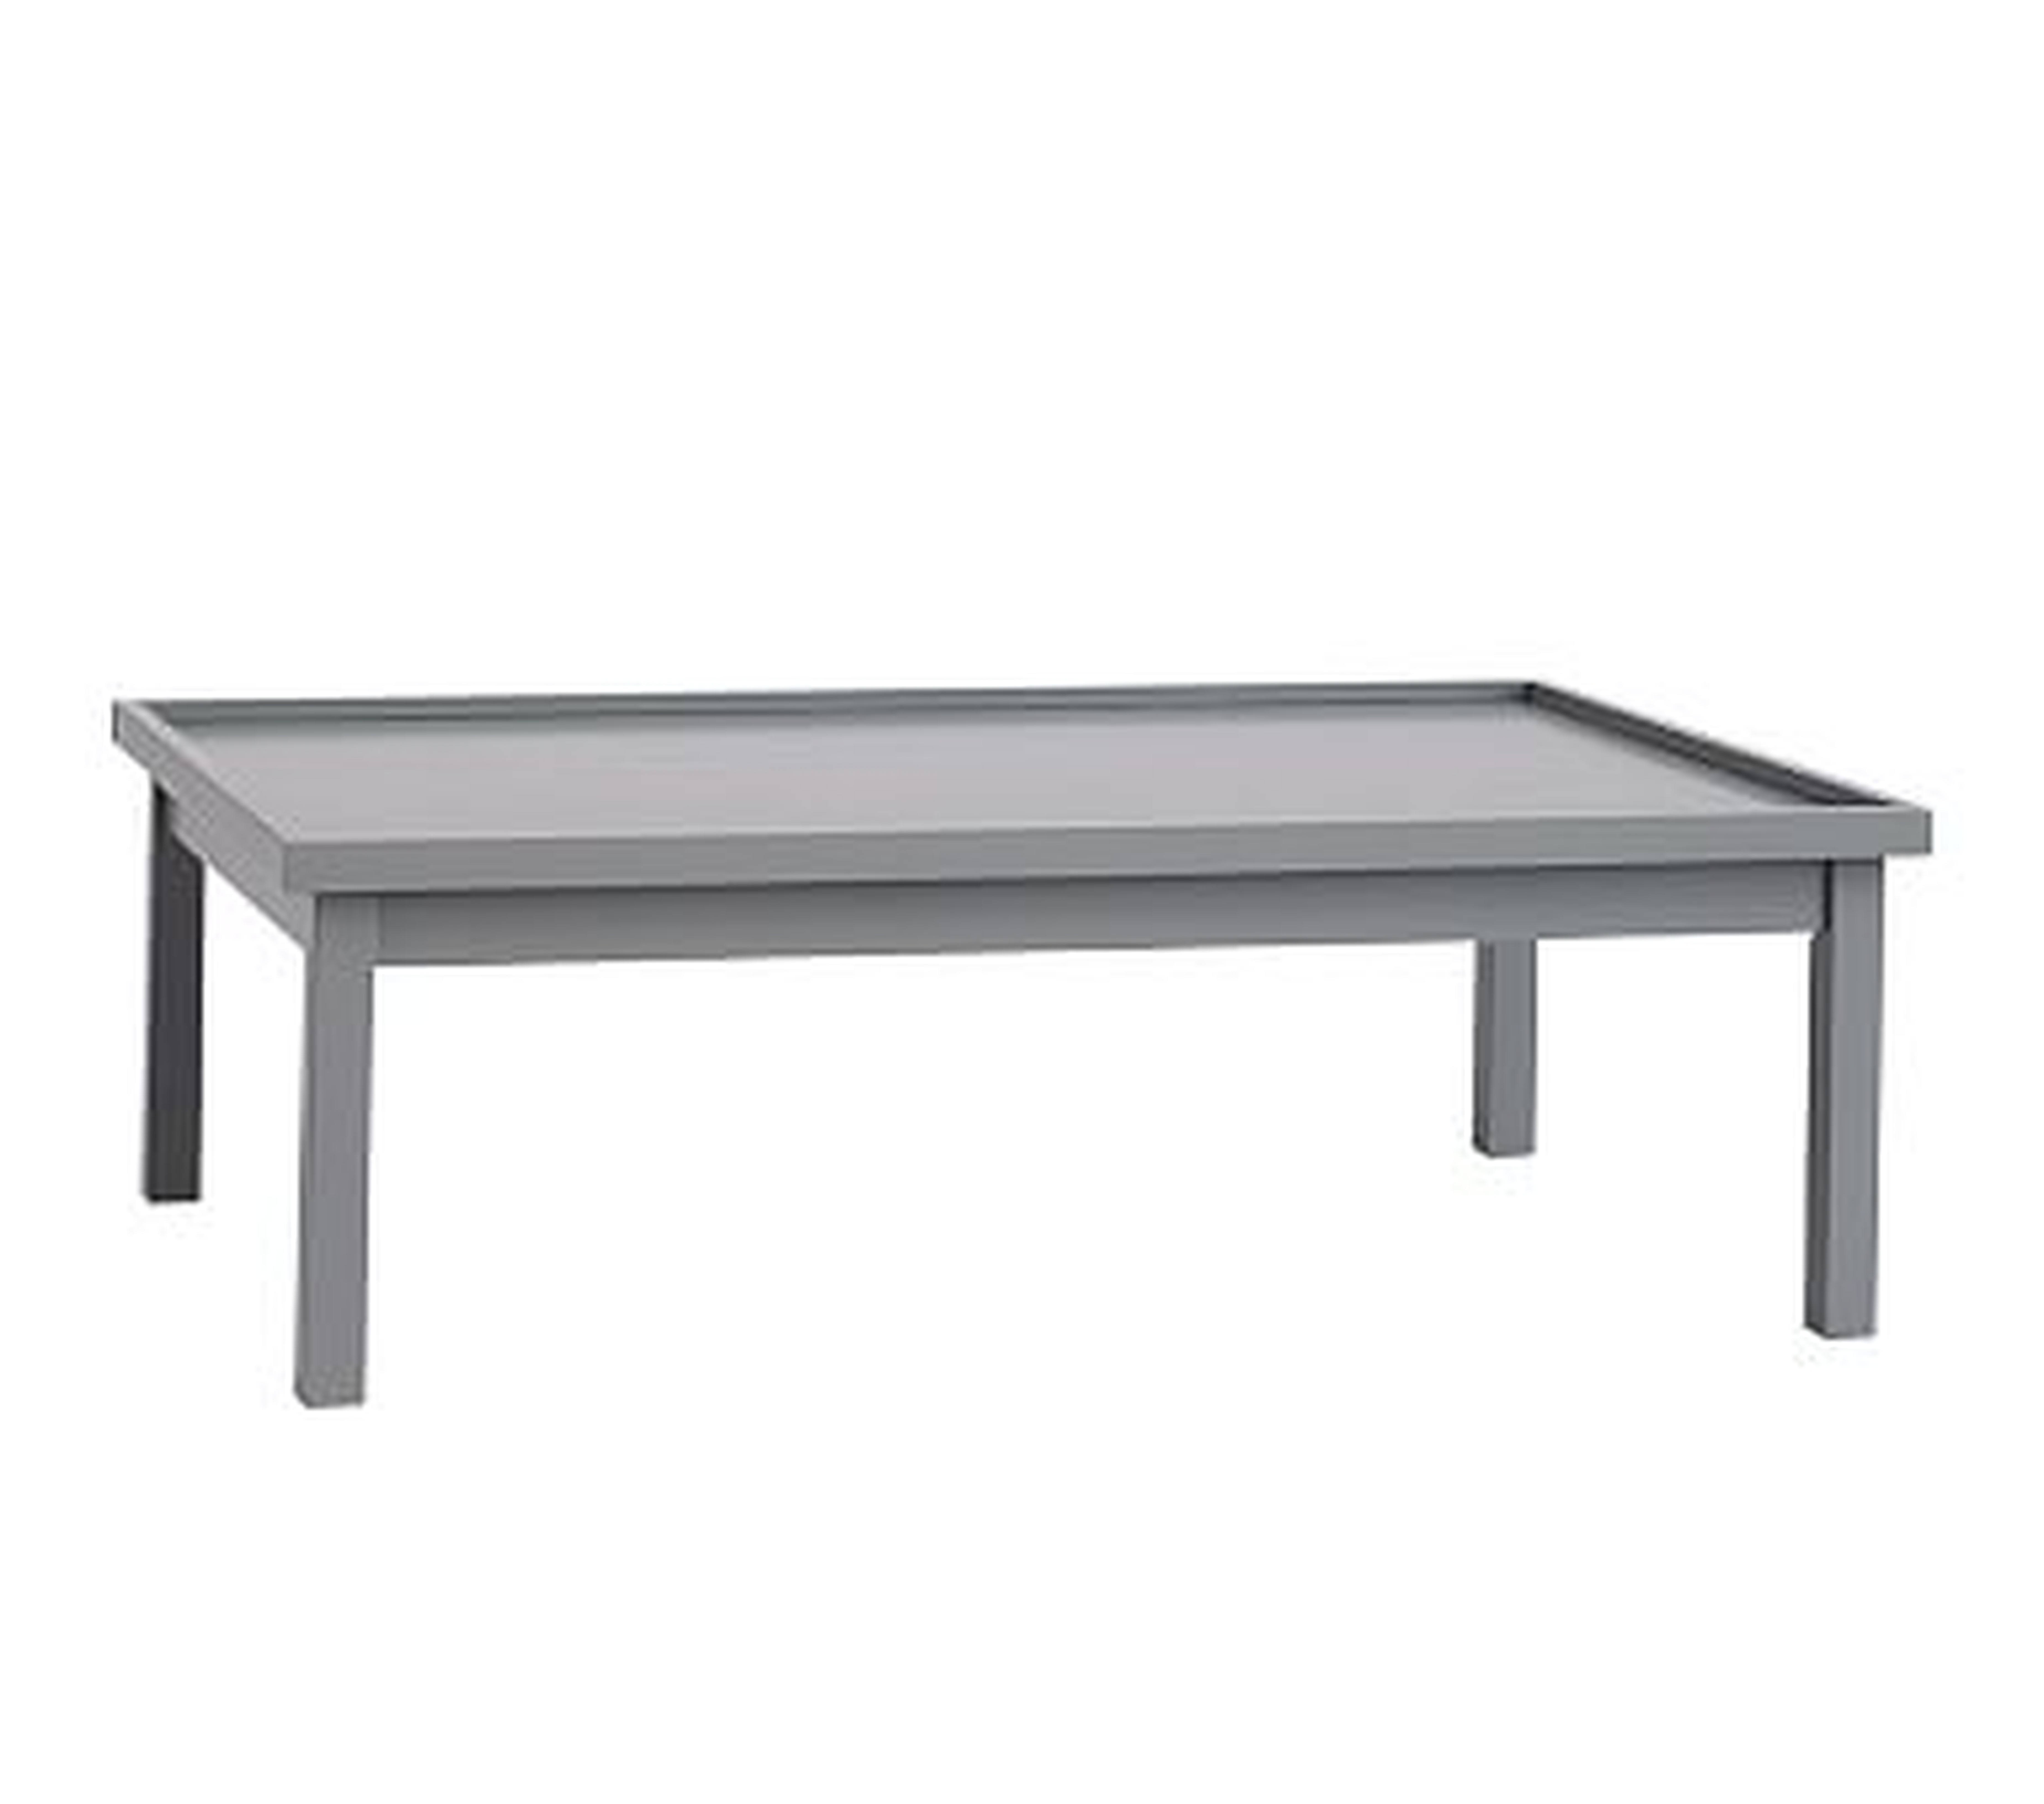 Carolina Activity Table with Low Legs, Charcoal - Pottery Barn Kids